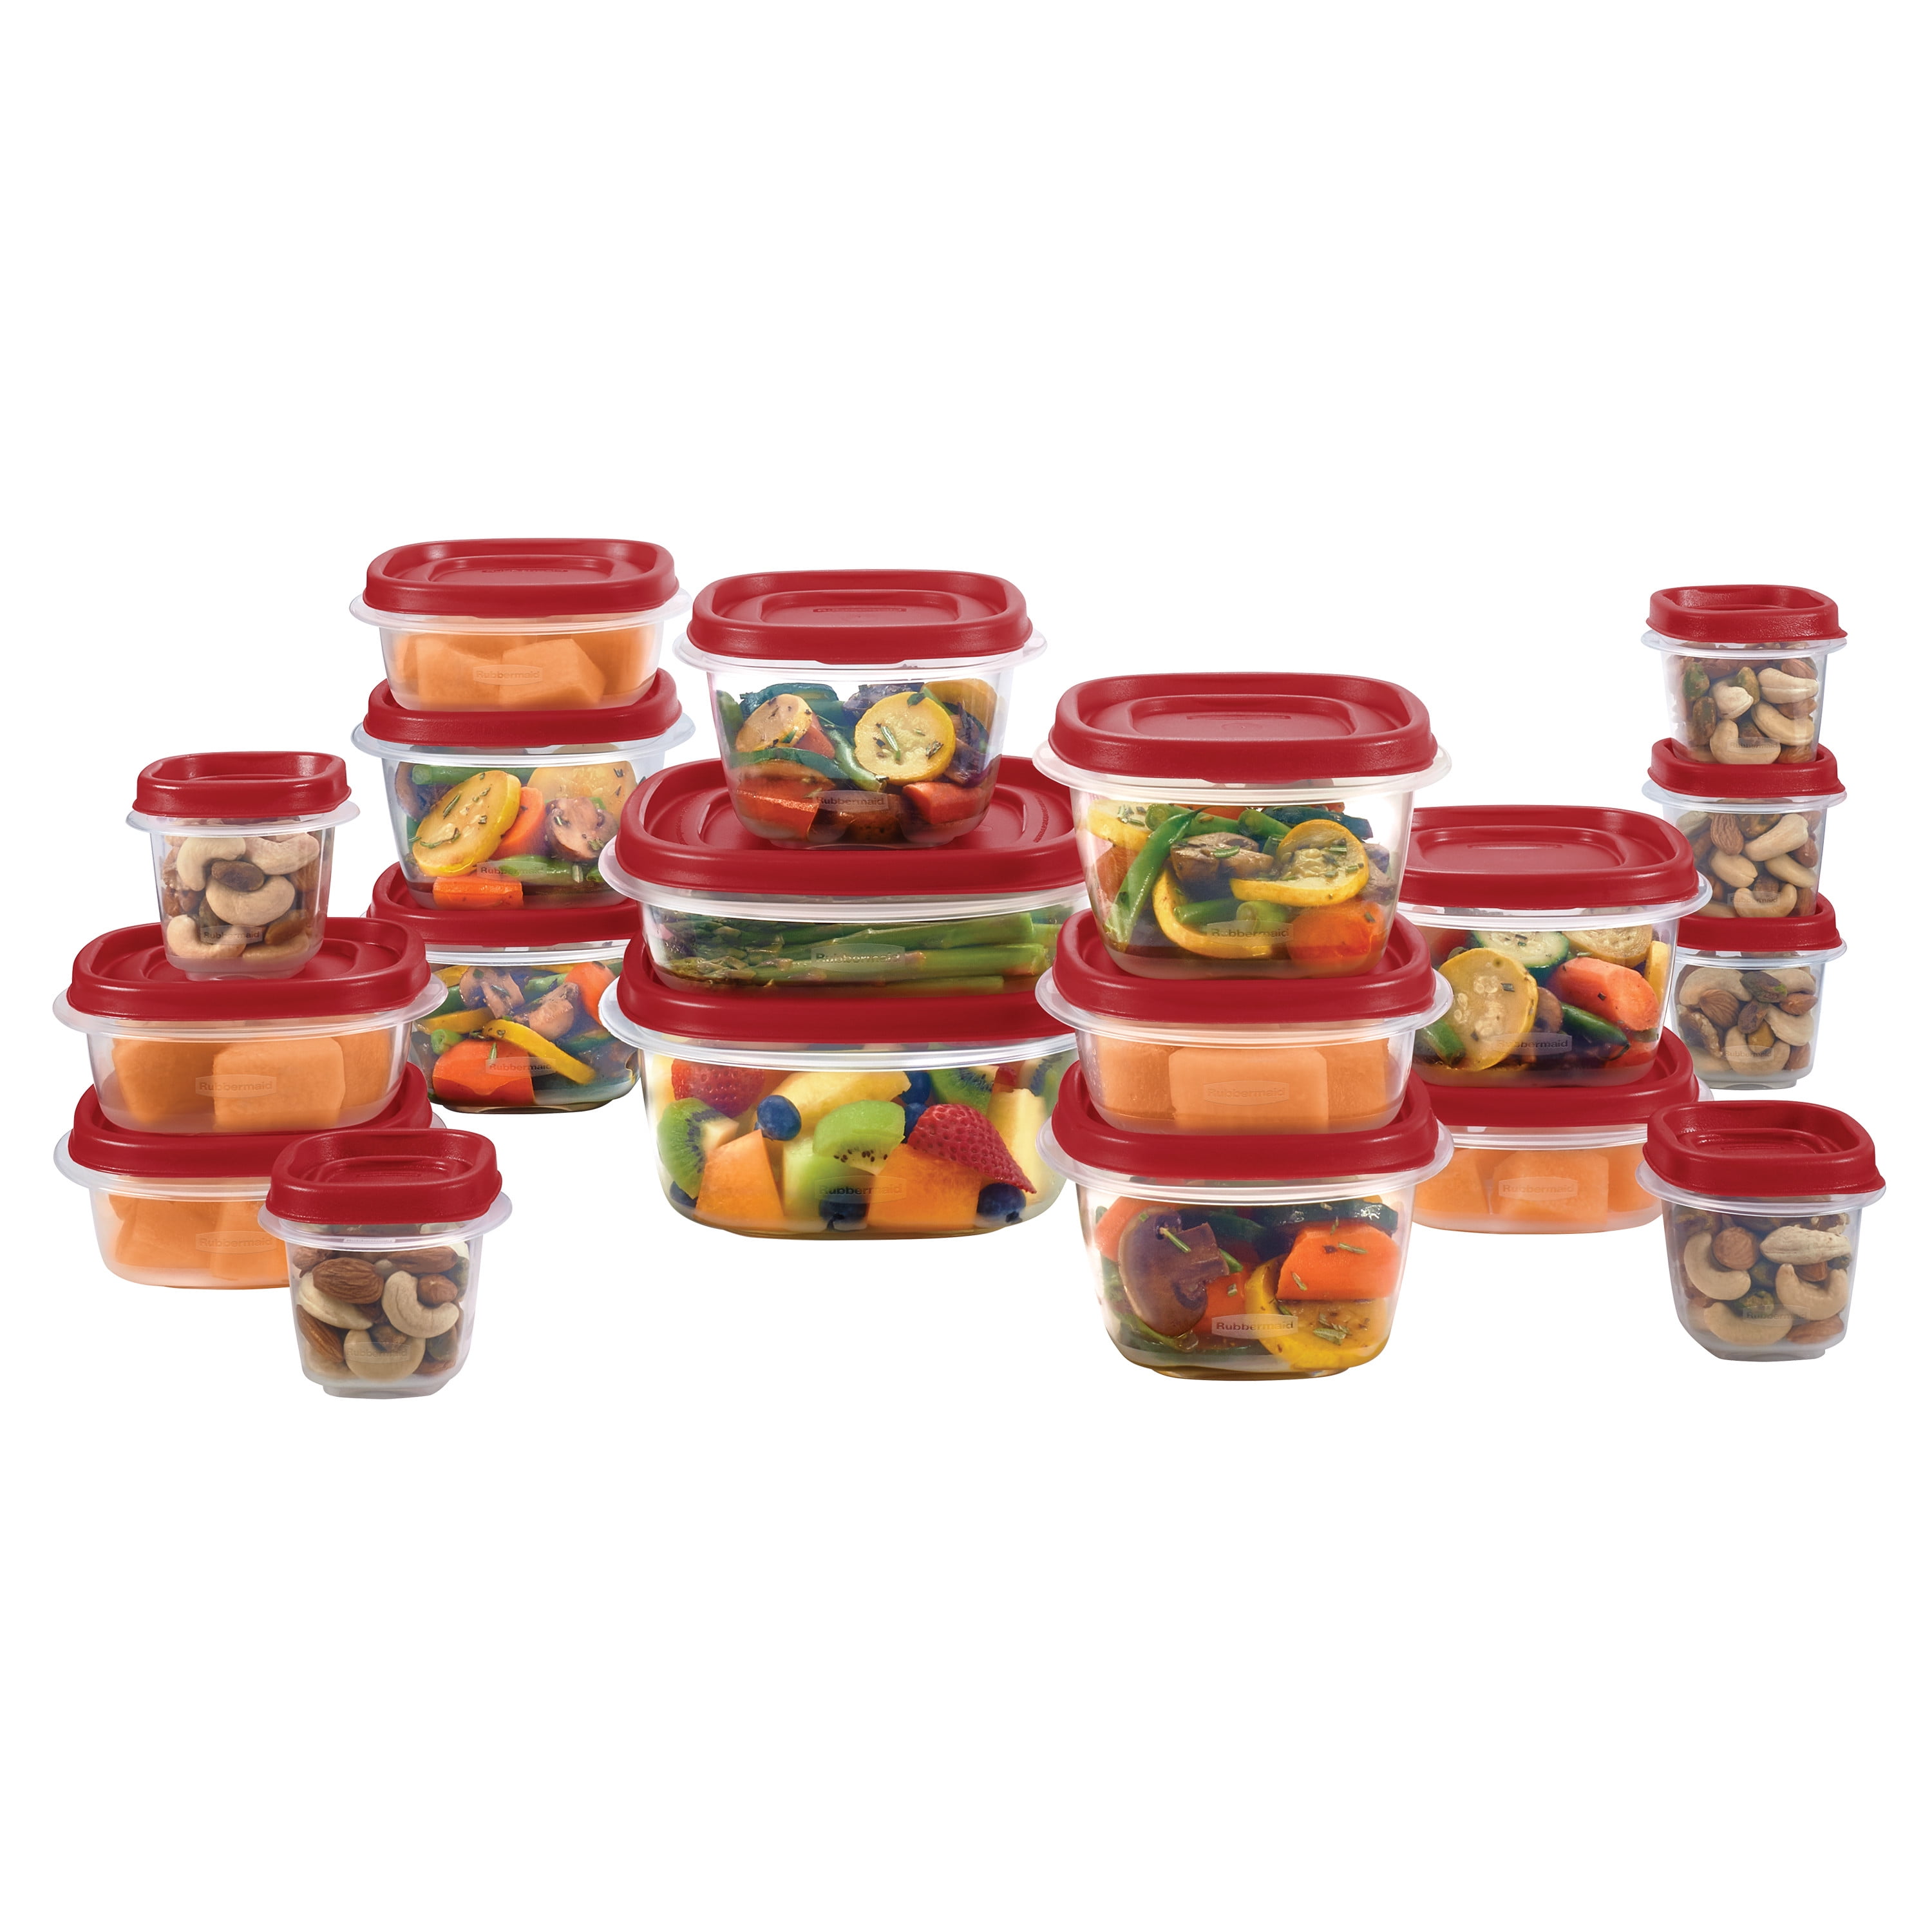 Rubbermaid 38-Piece Food Storage Containers with Snap Bases for Easy  Organization and Lids for Lunch, Meal Prep, and Leftovers, Dishwasher Safe